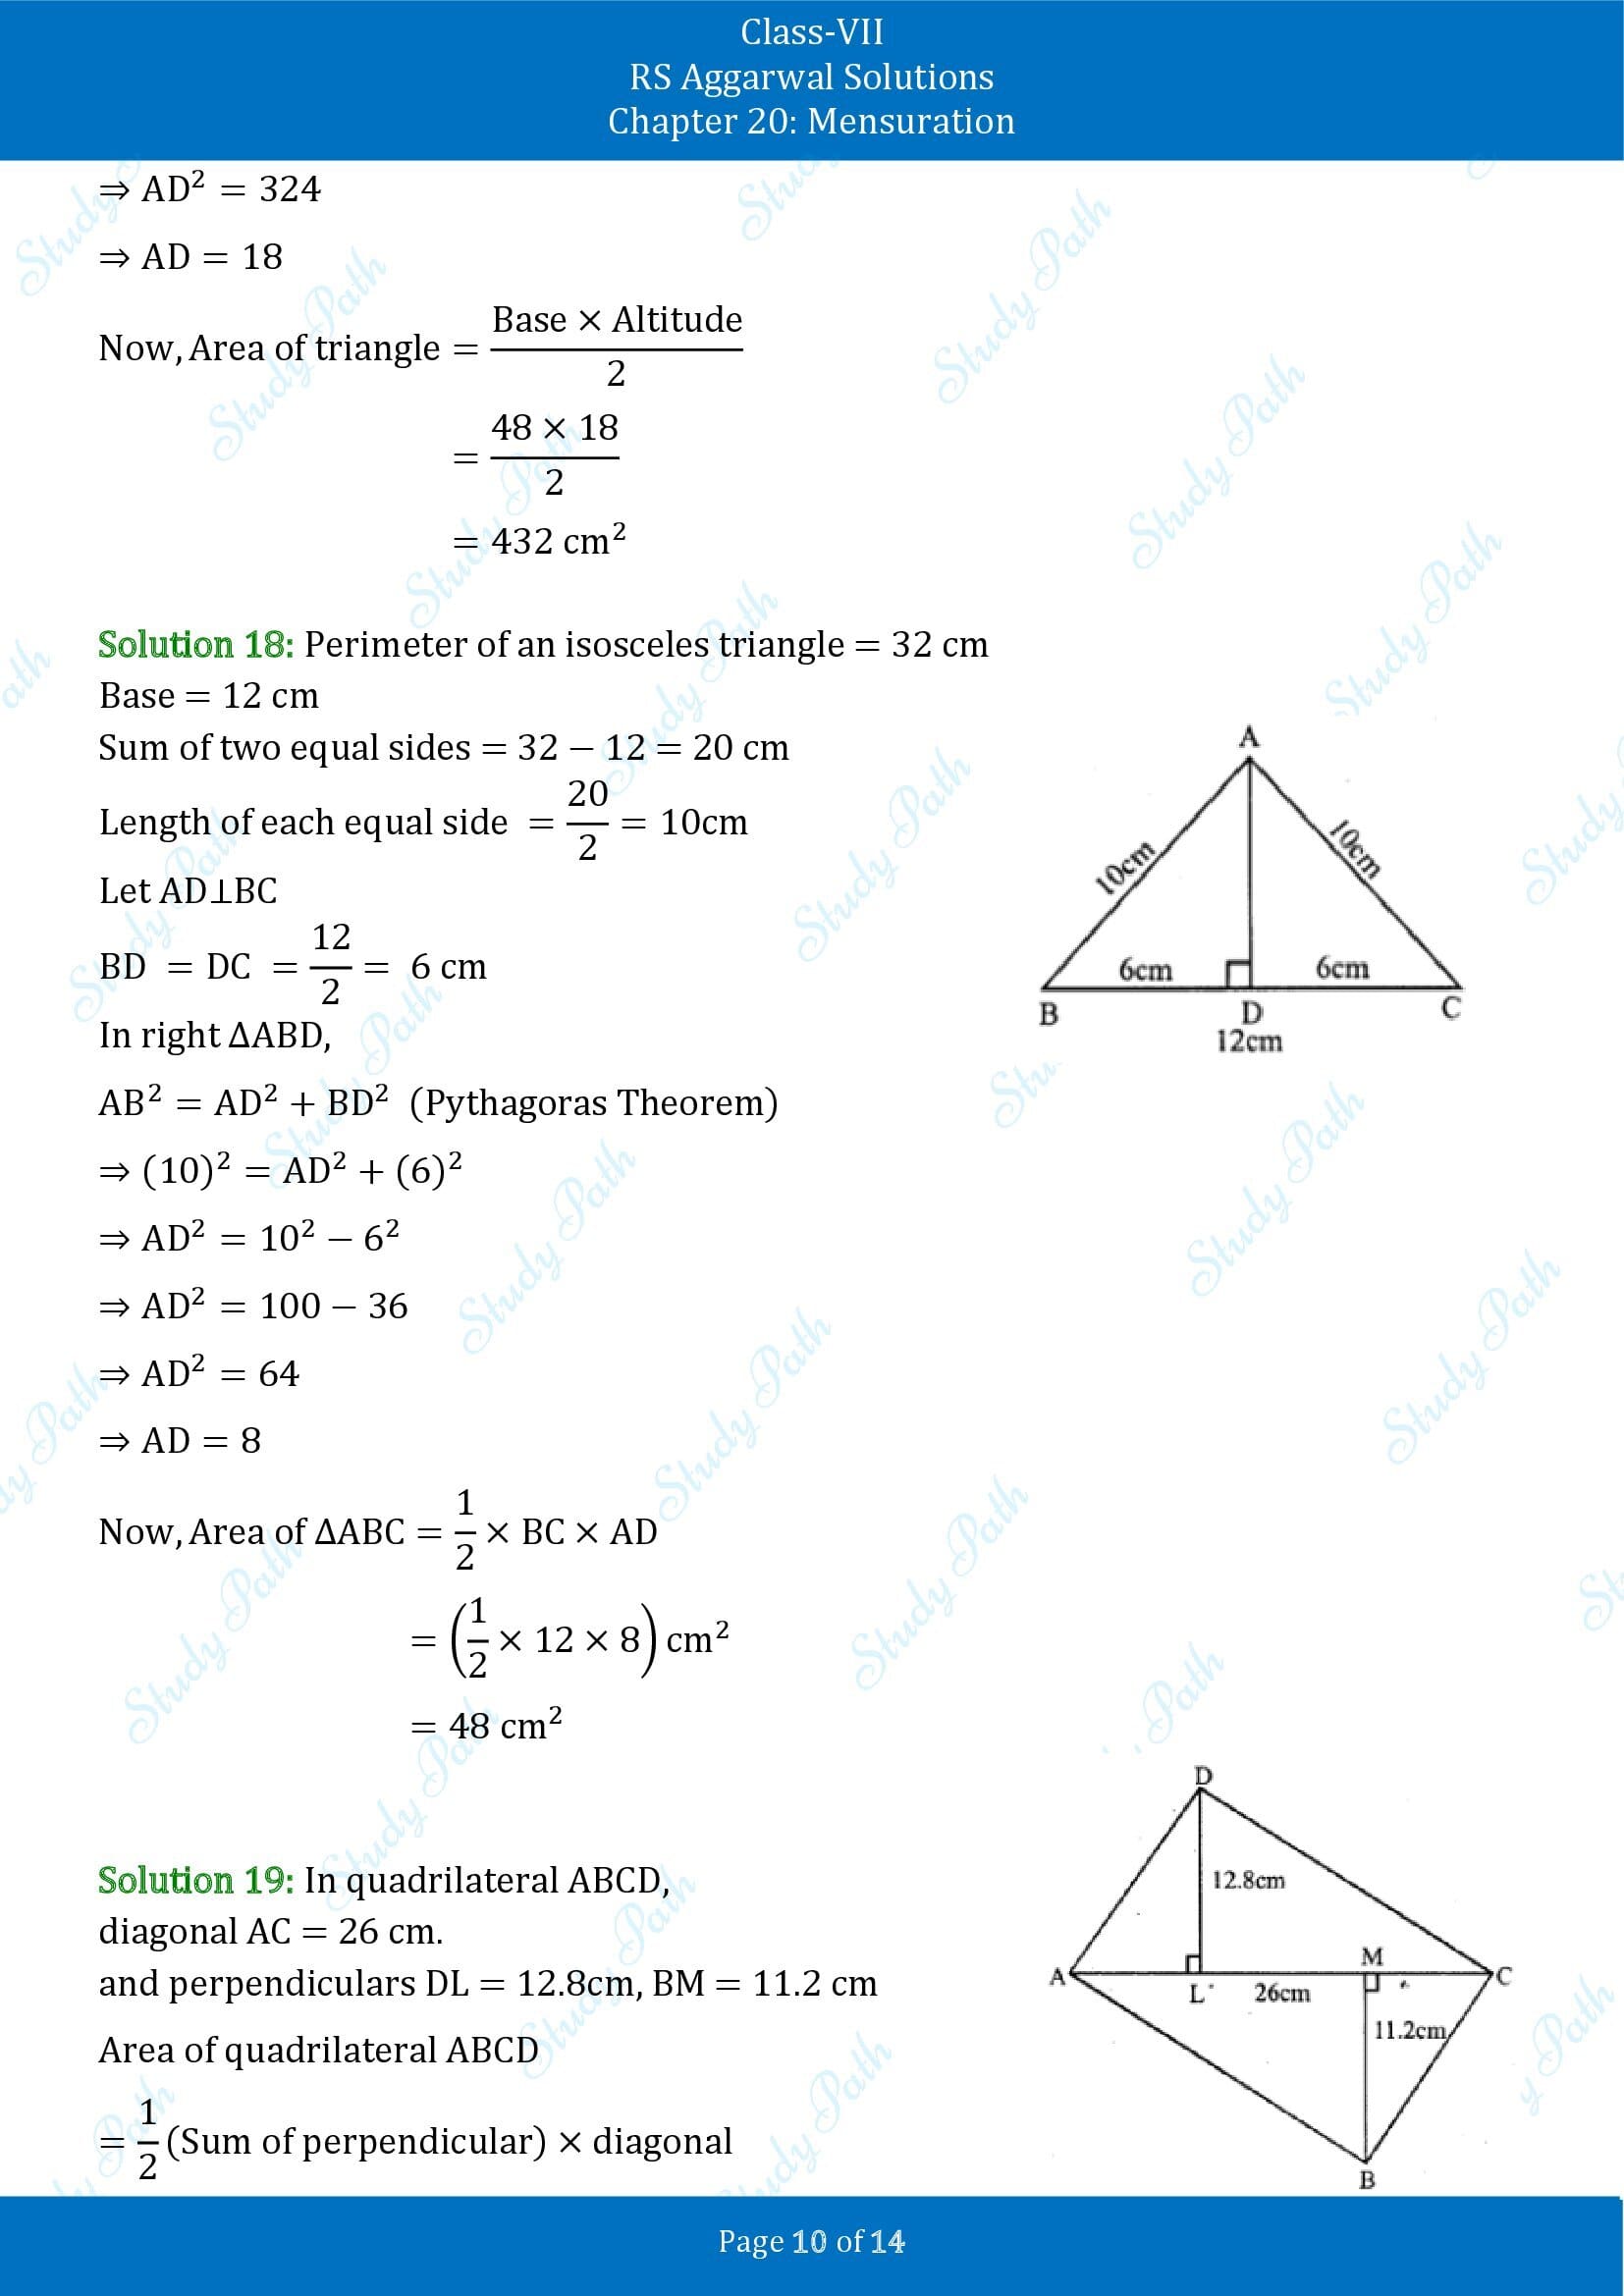 RS Aggarwal Solutions Class 7 Chapter 20 Mensuration Exercise 20D 00010